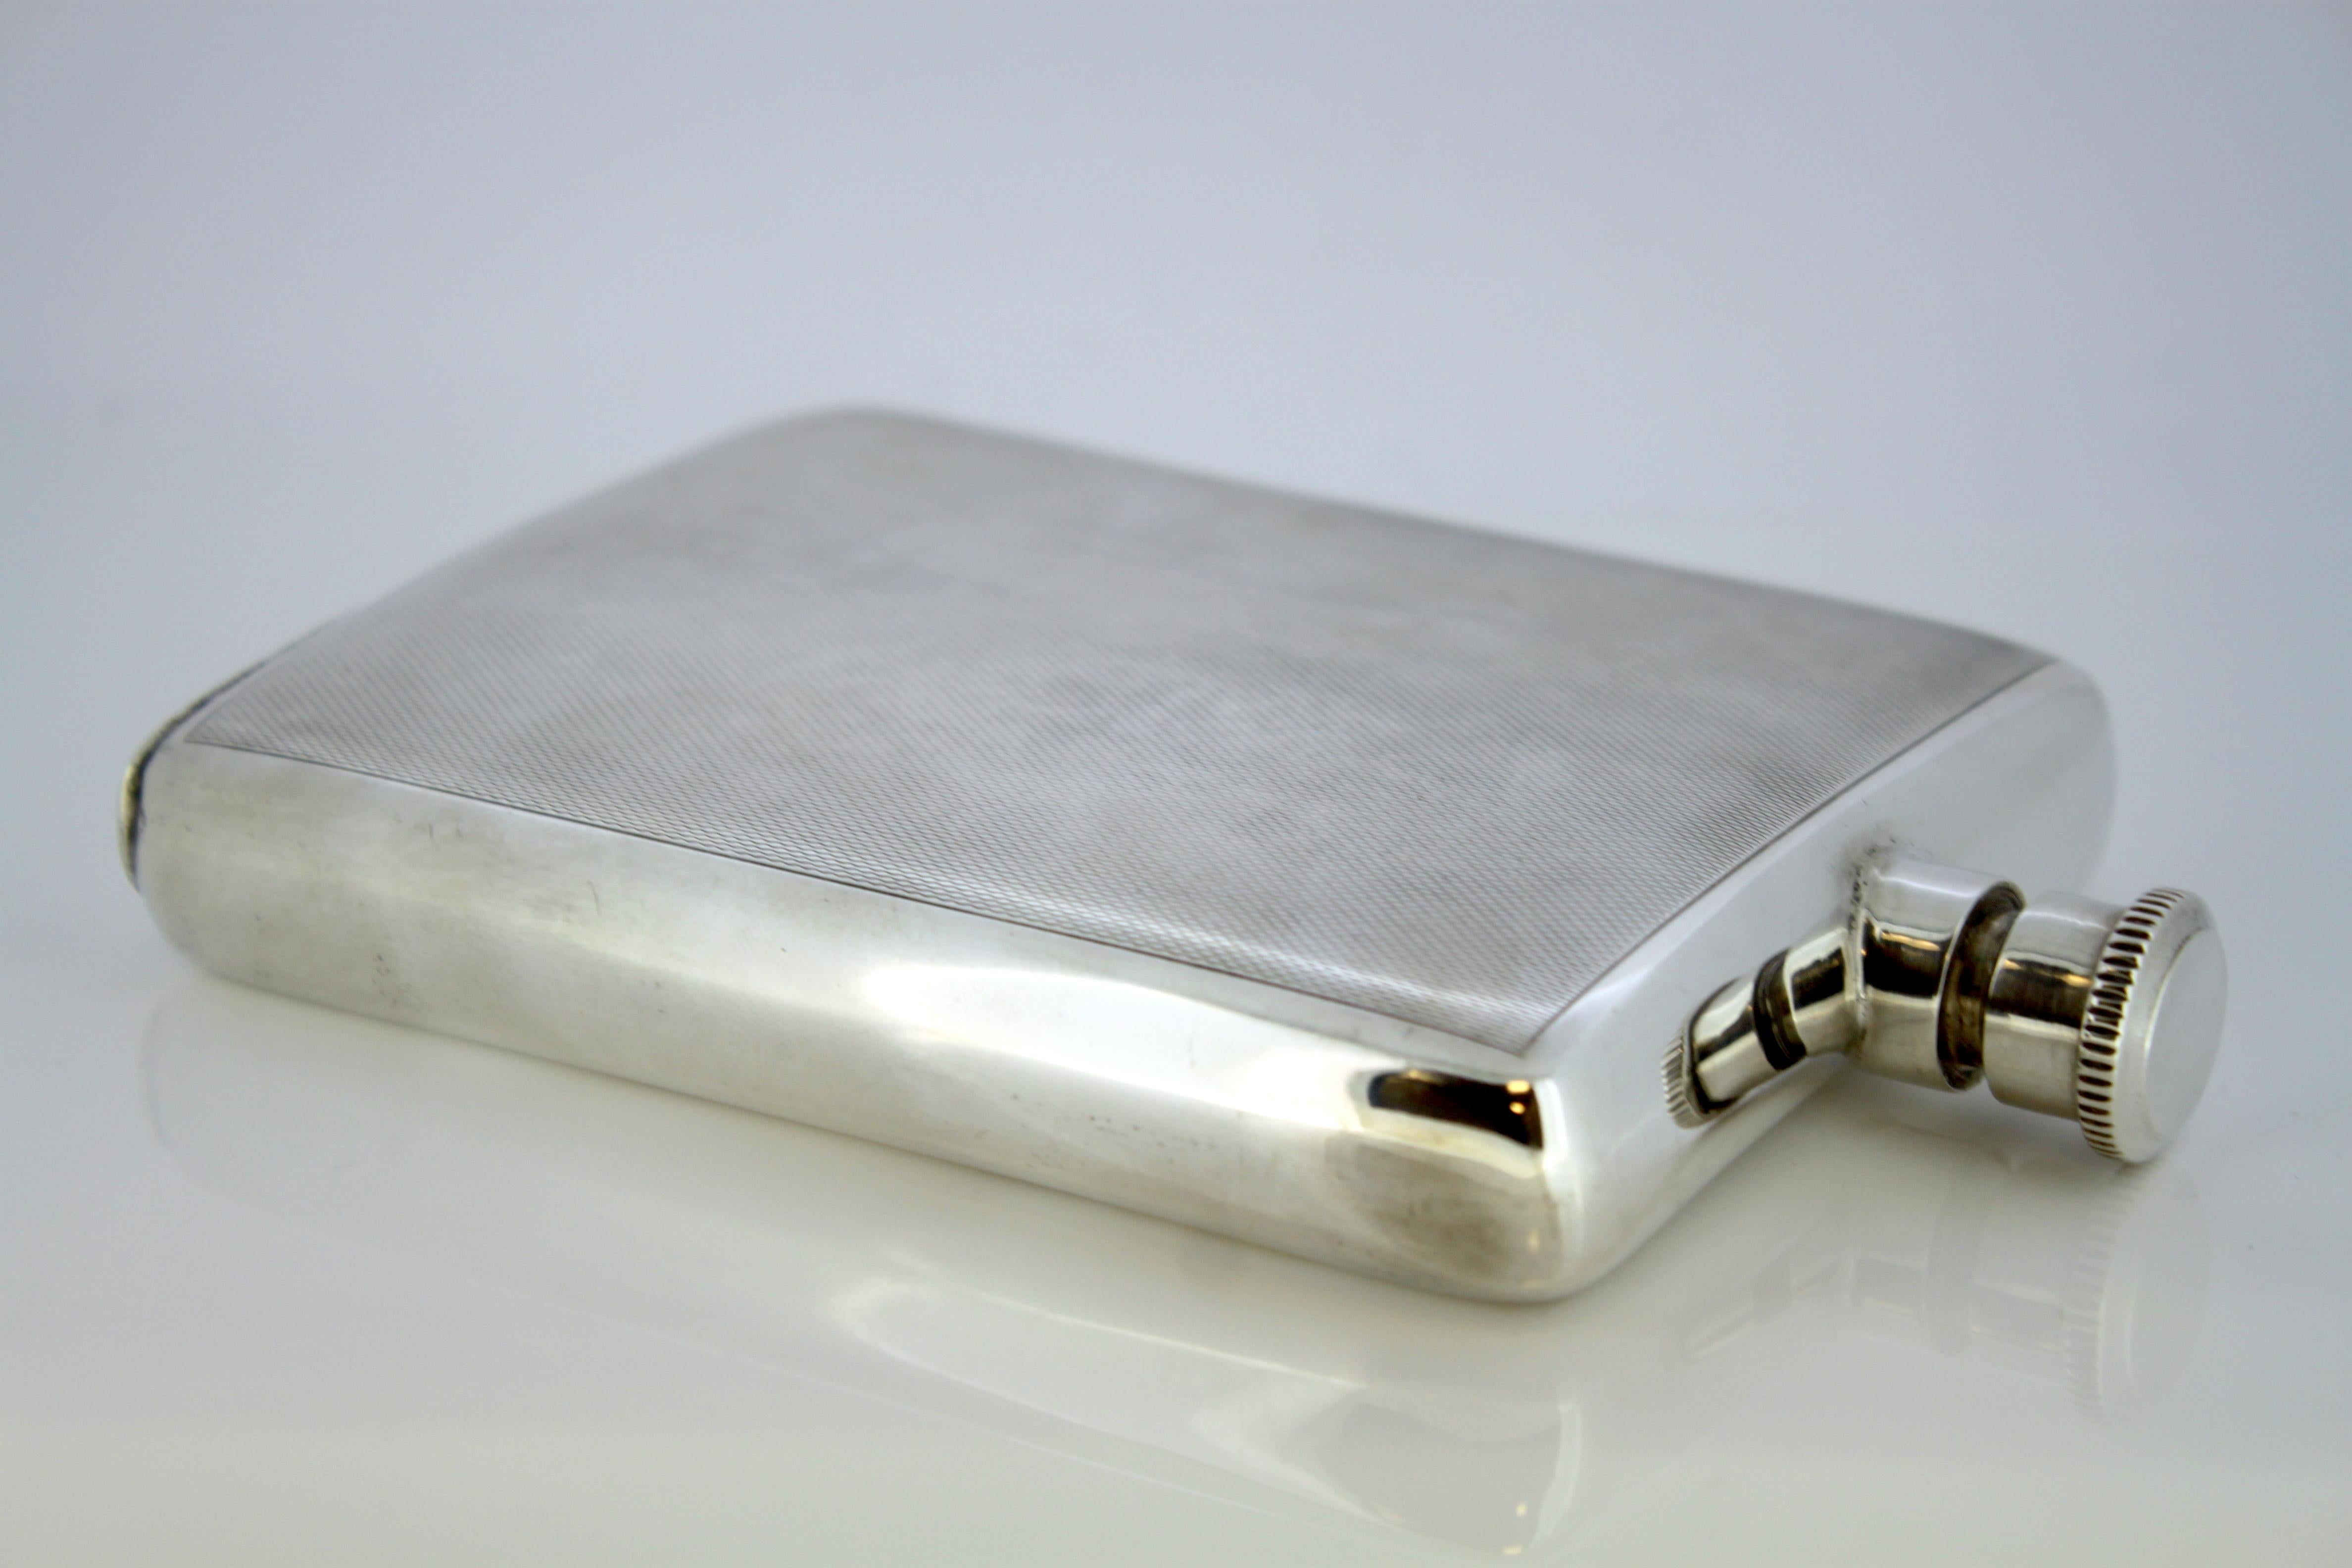 Vintage silver hip flask

Made in England, Birmingham, 1971
Maker: Charles S Green & Co.
Fully Hallmarked.

Dimensions:
Size
10 x 2 x 14.5 cm
Total weight 205 g

Condition: General used, age related wear, otherwise excellent condition,